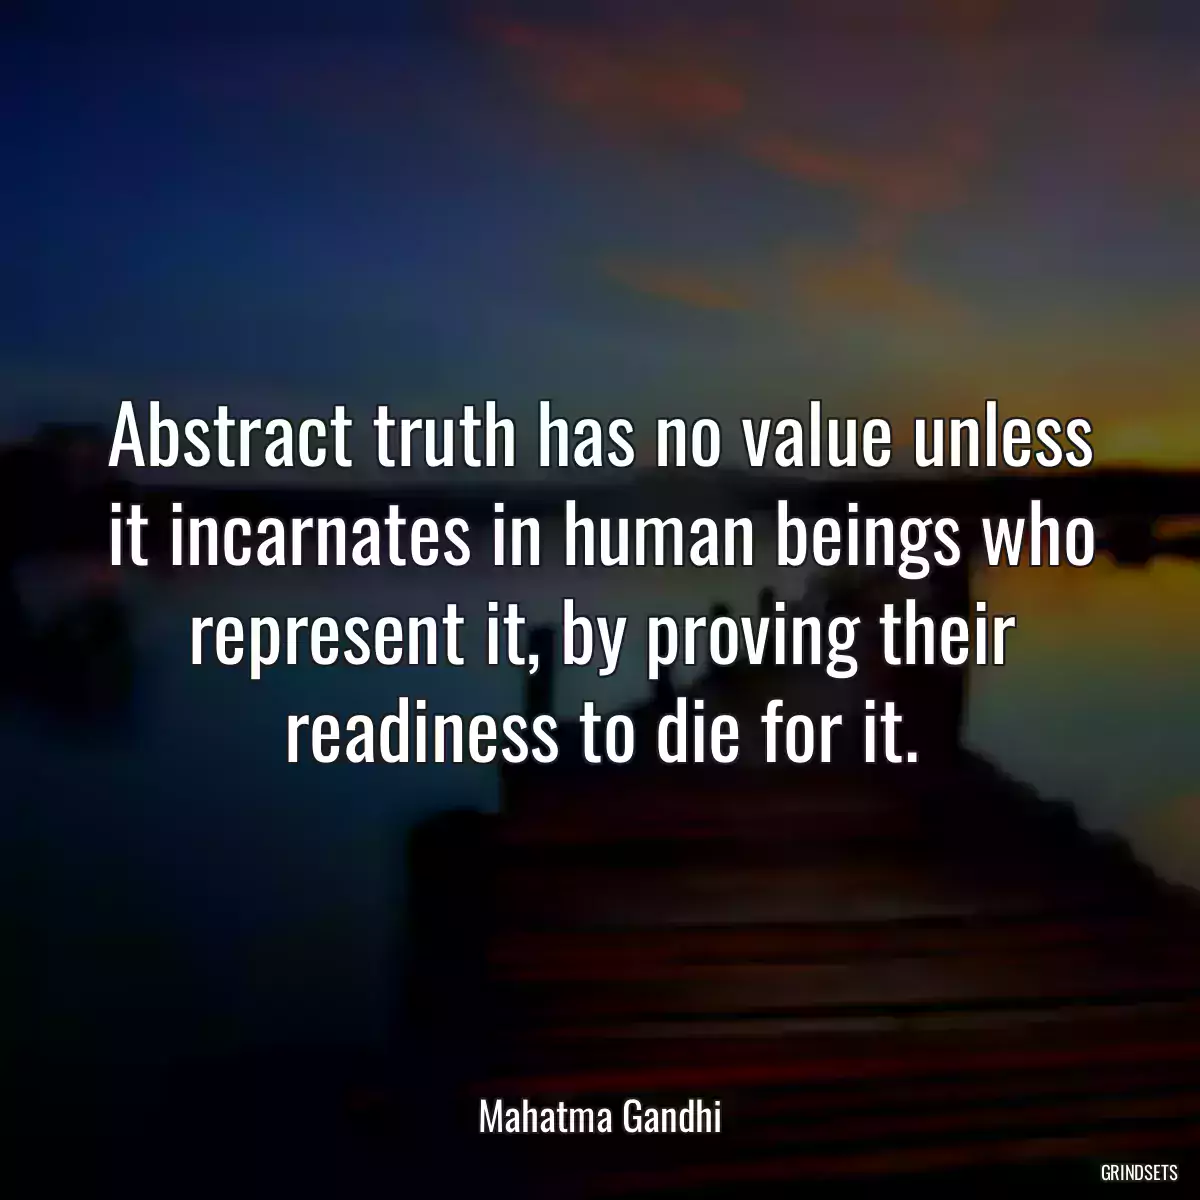 Abstract truth has no value unless it incarnates in human beings who represent it, by proving their readiness to die for it.